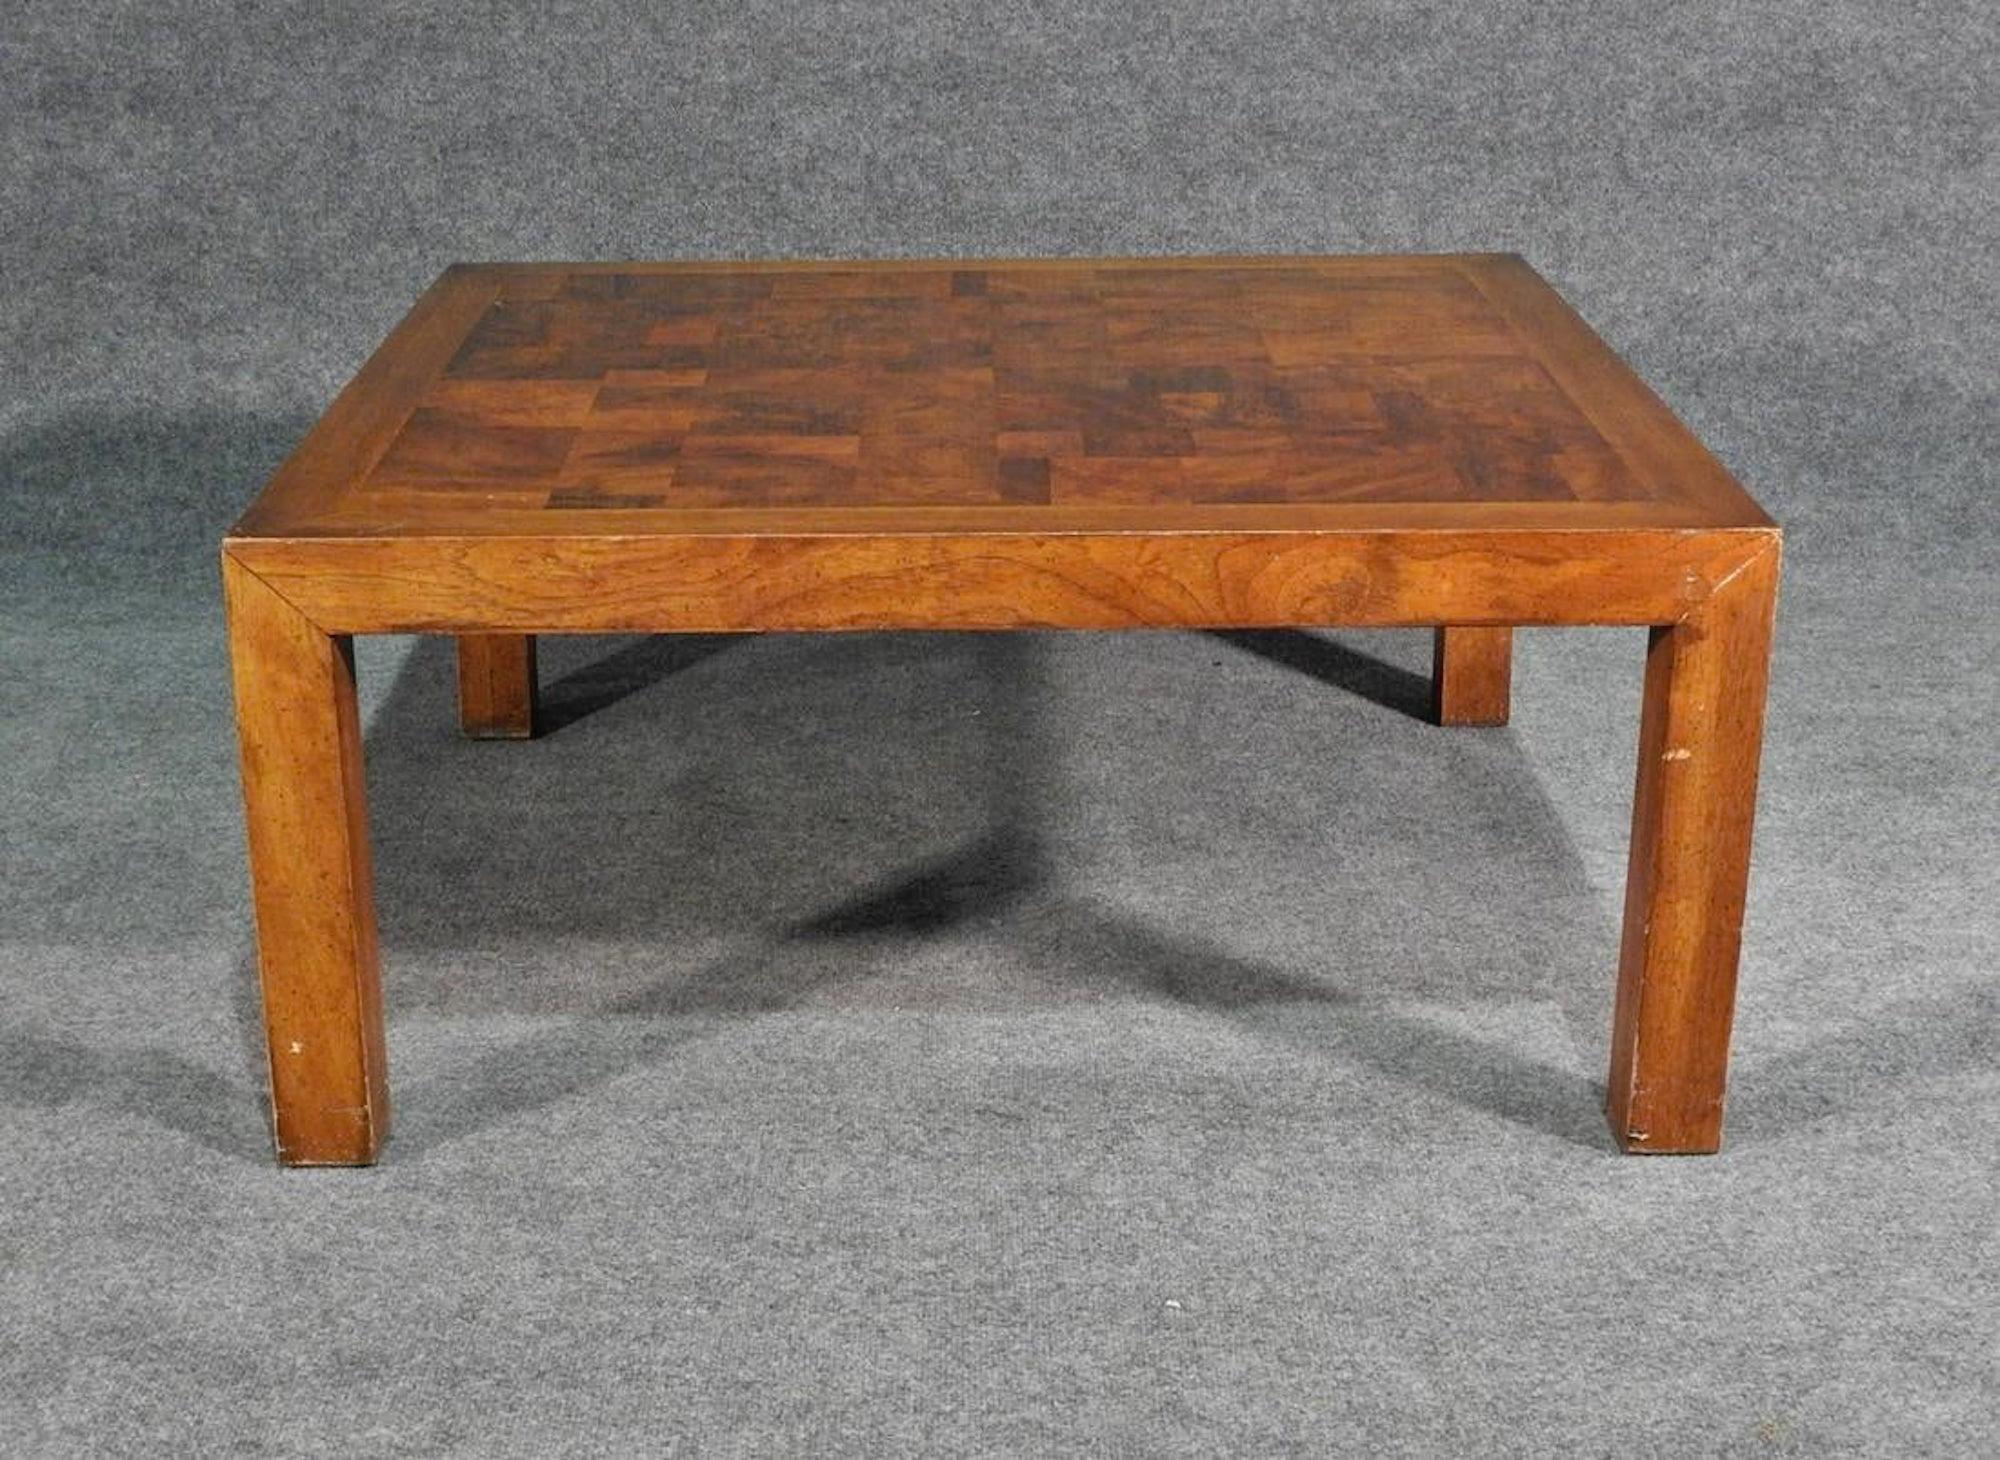 Vintage modern coffee table by Drexel with patchwork burl inlay top and walnut frame.
(Please confirm item location - NY or NJ - with dealer).
 